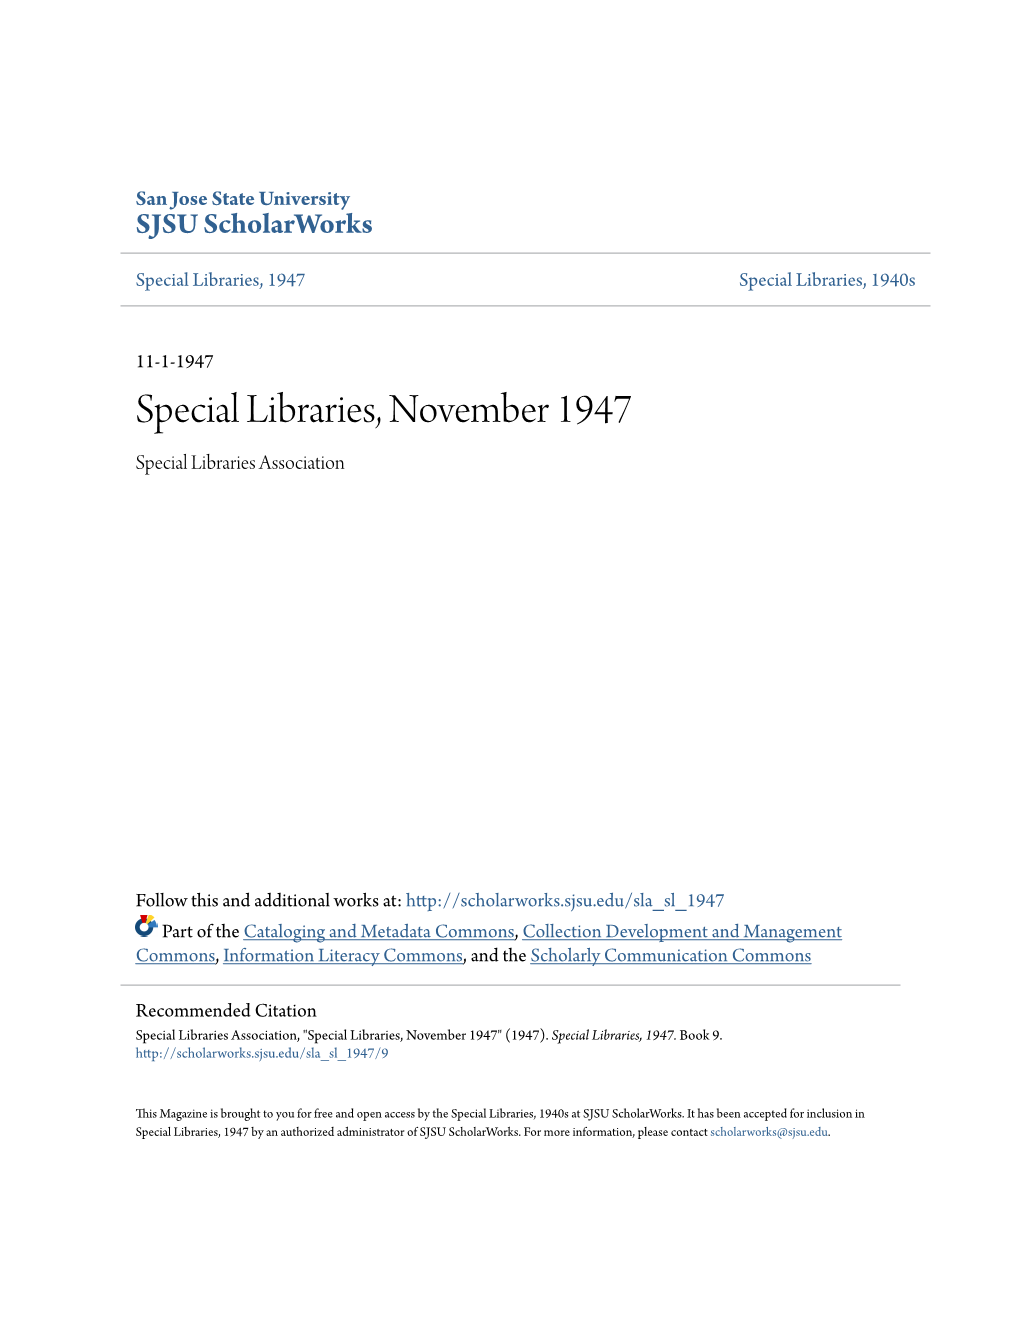 Special Libraries, November 1947 Special Libraries Association